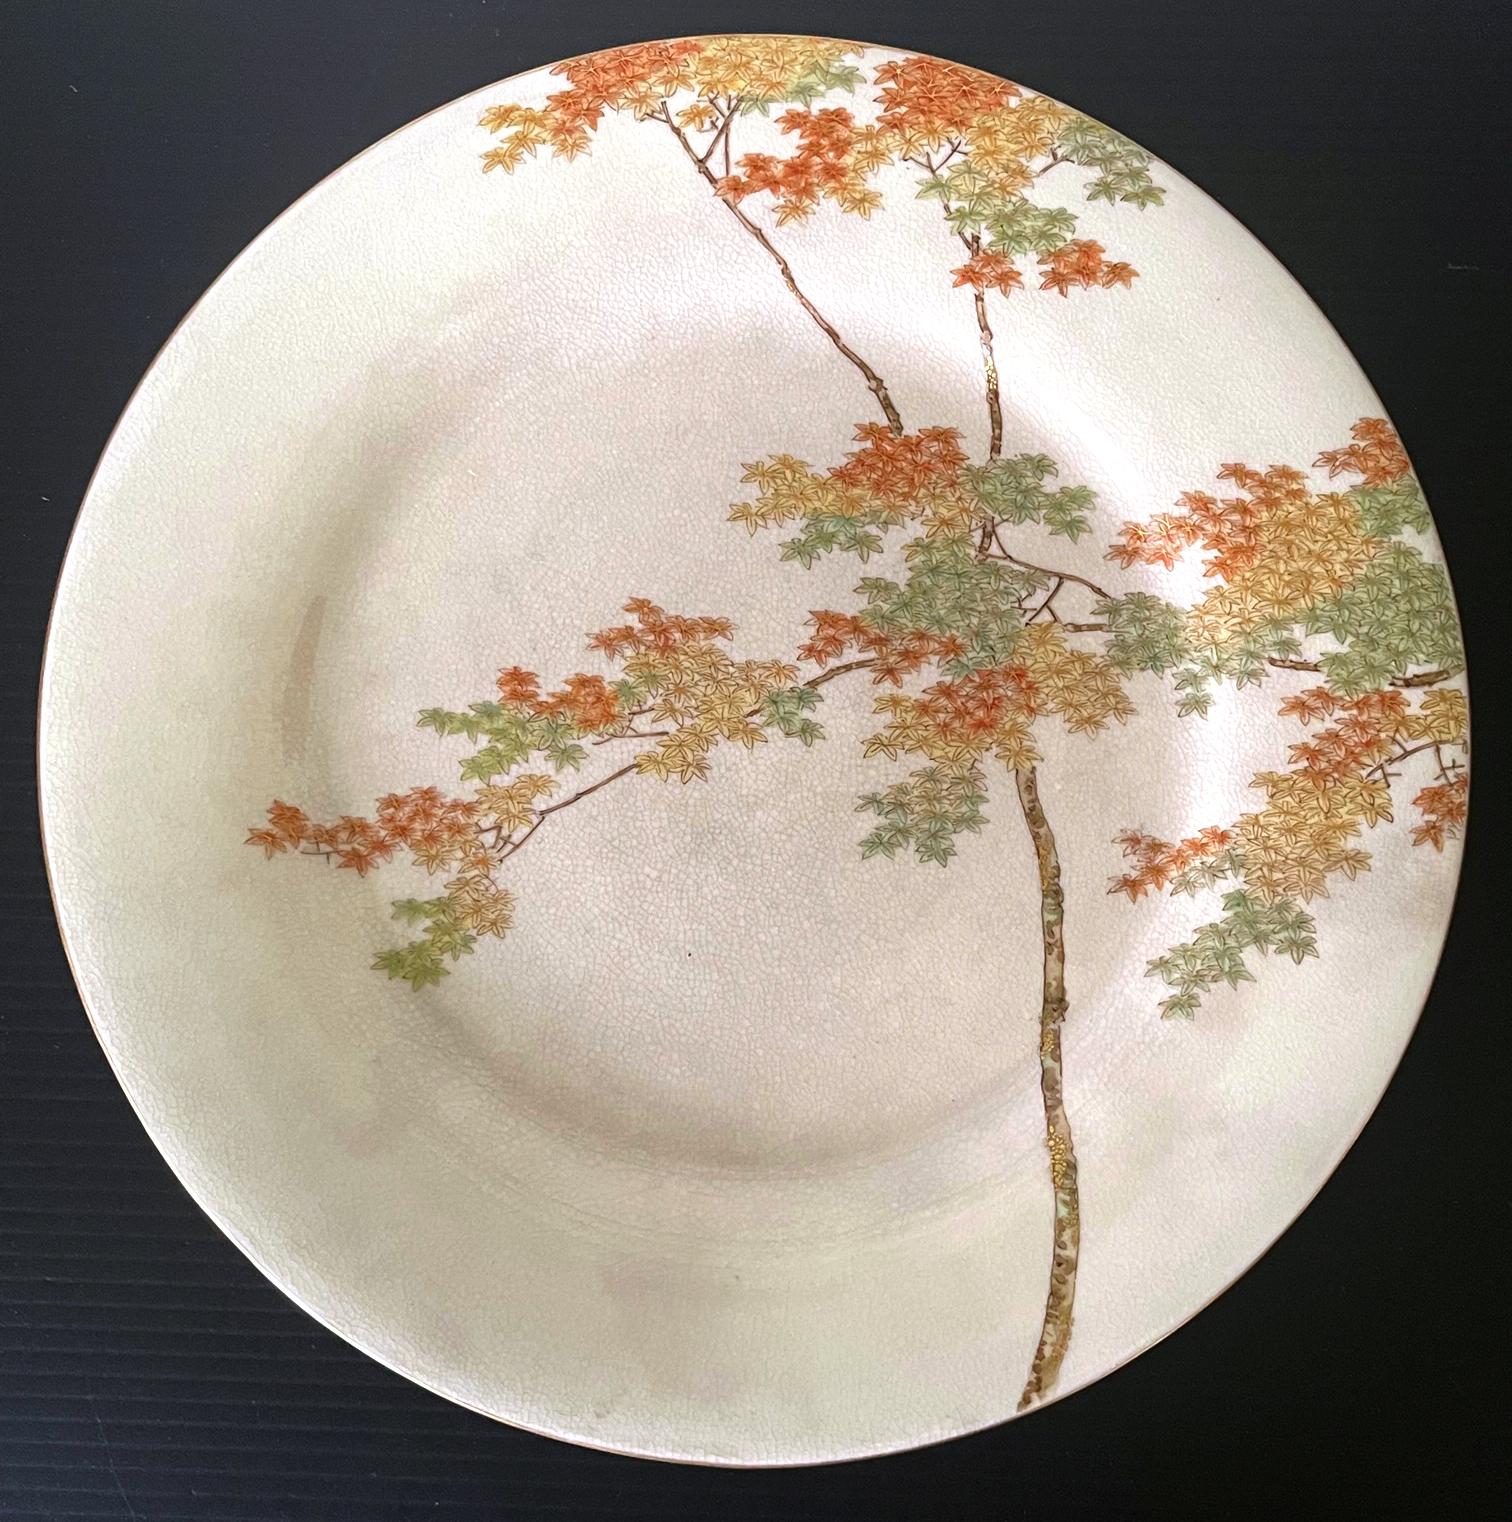 A fine Japanese ceramic satsuma plate made by Kinkozan and retailed by Yamanaka & Co. circa 1900-20s (late Meiji to early Tasho Period). The cream-color glazed plate features a very fine decoration of a maple tree in the midst of foliage